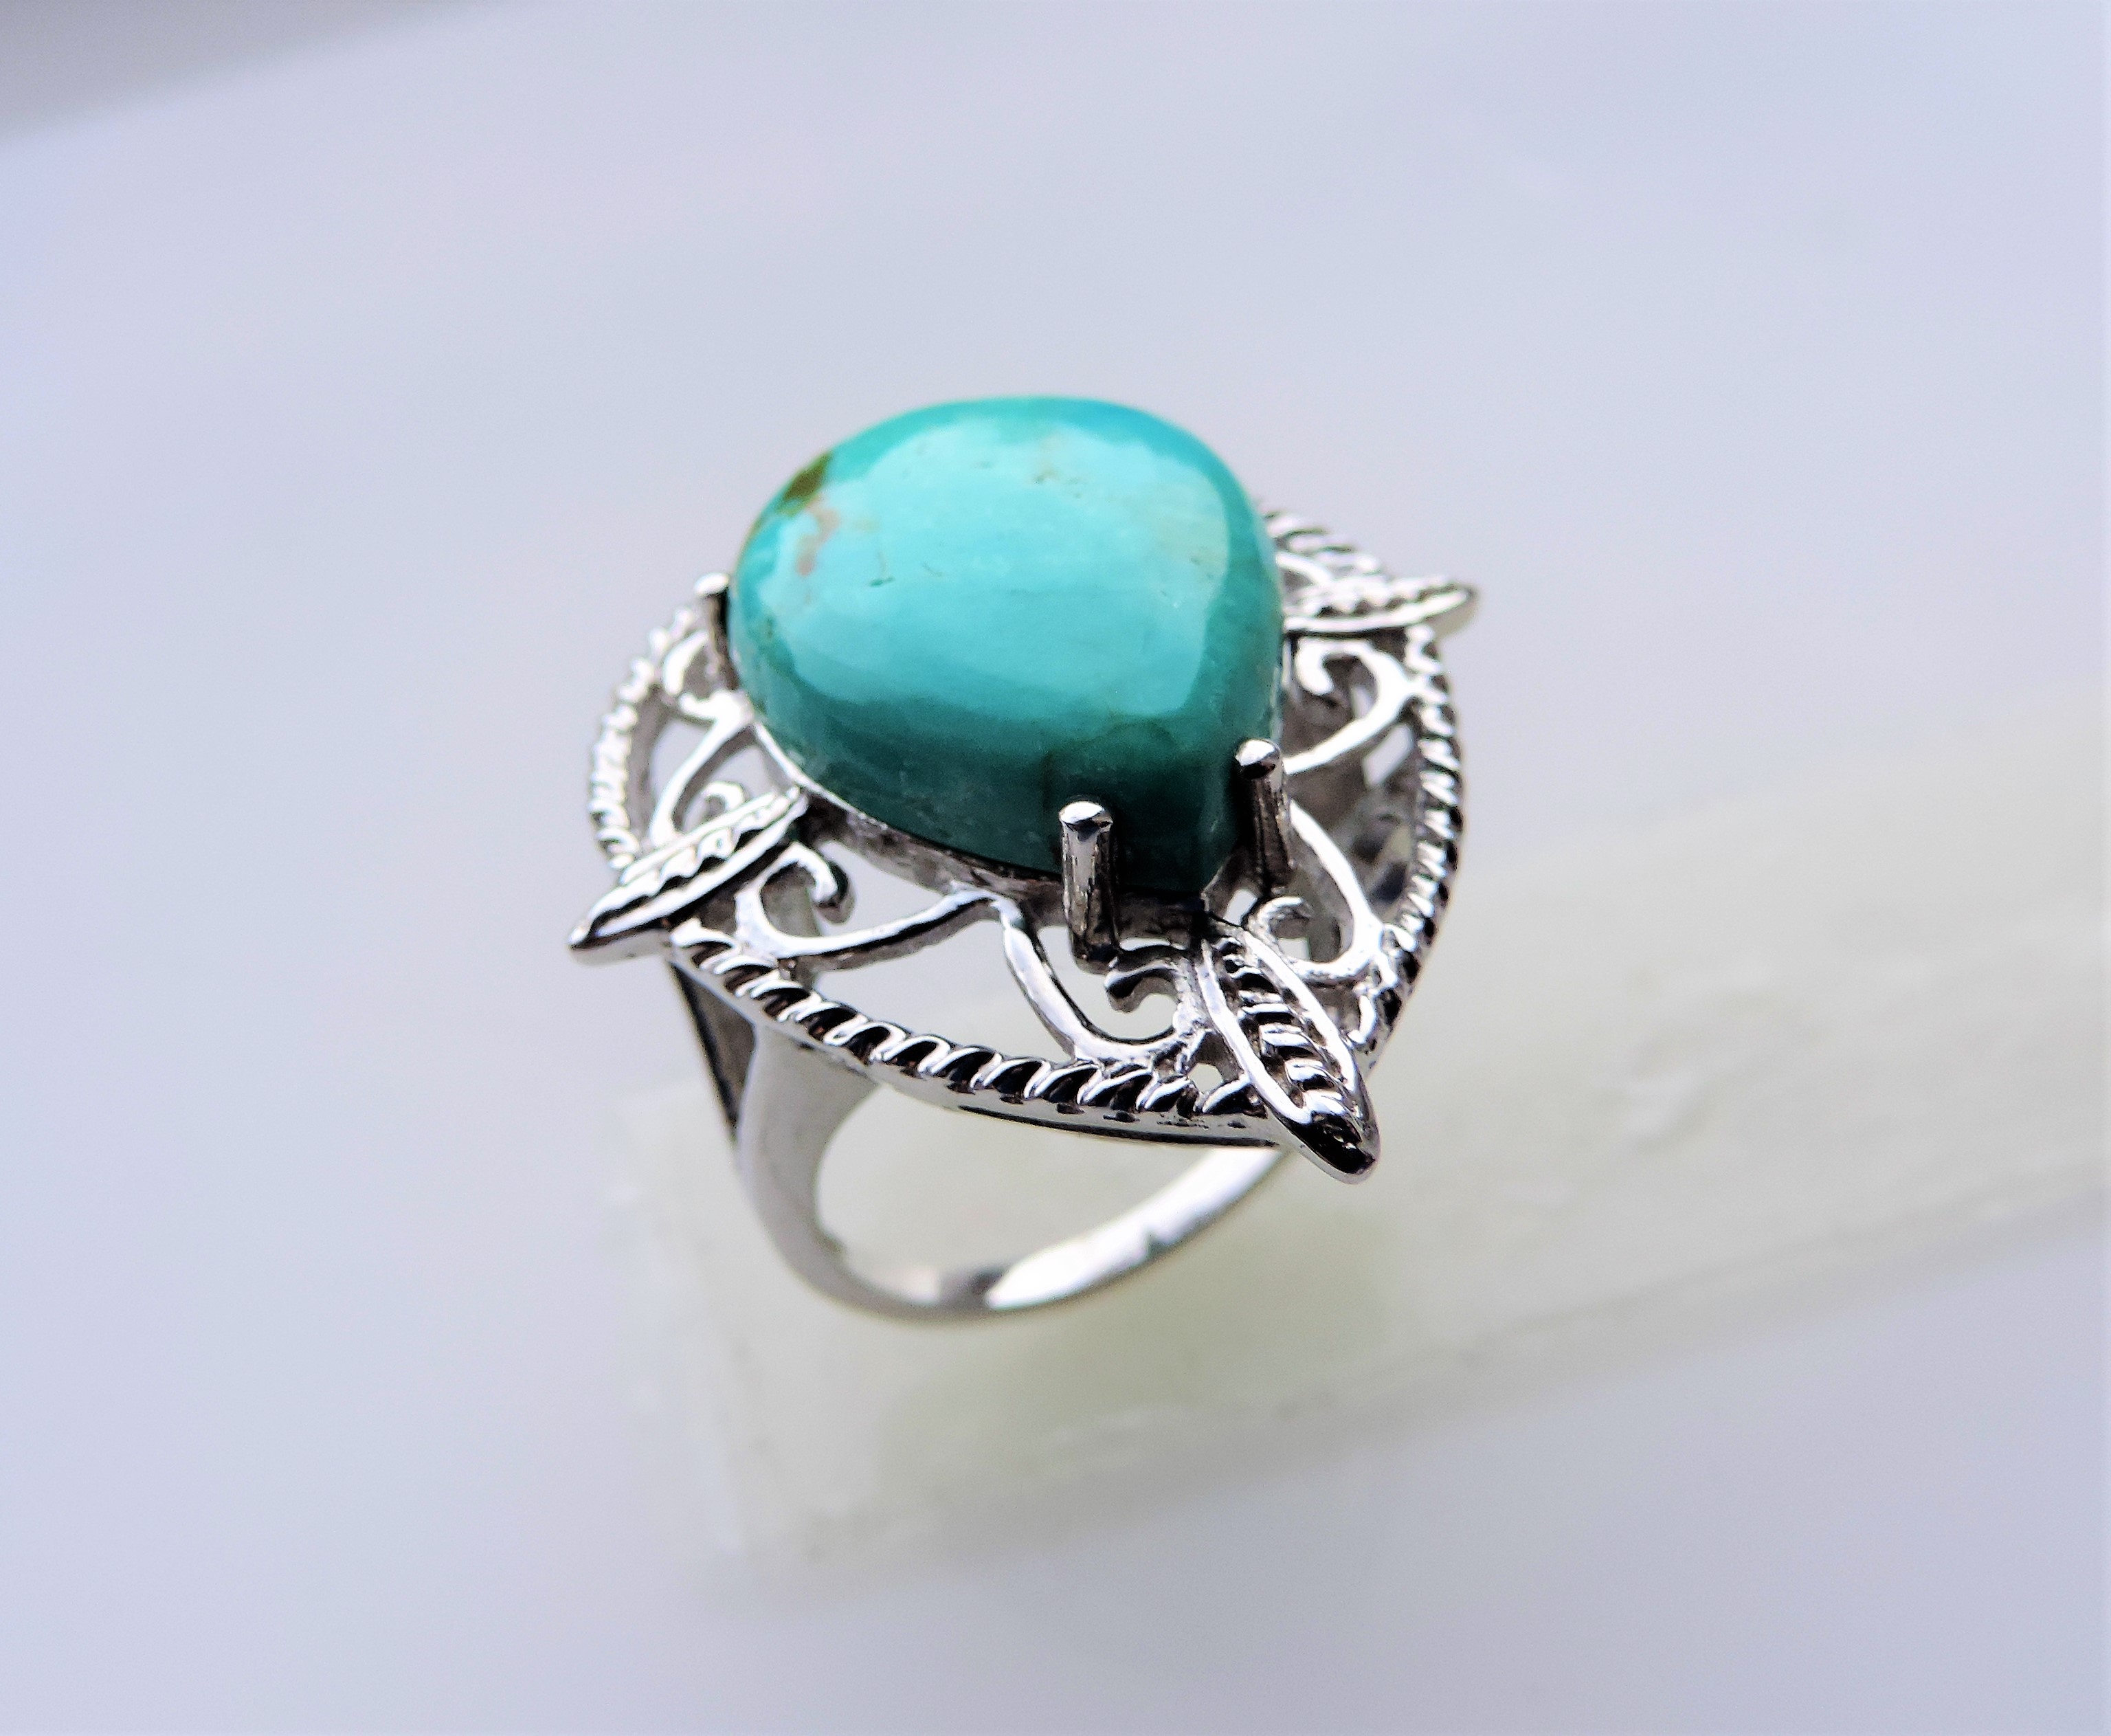 Turquoise Ring in Sterling Silver - Image 2 of 4